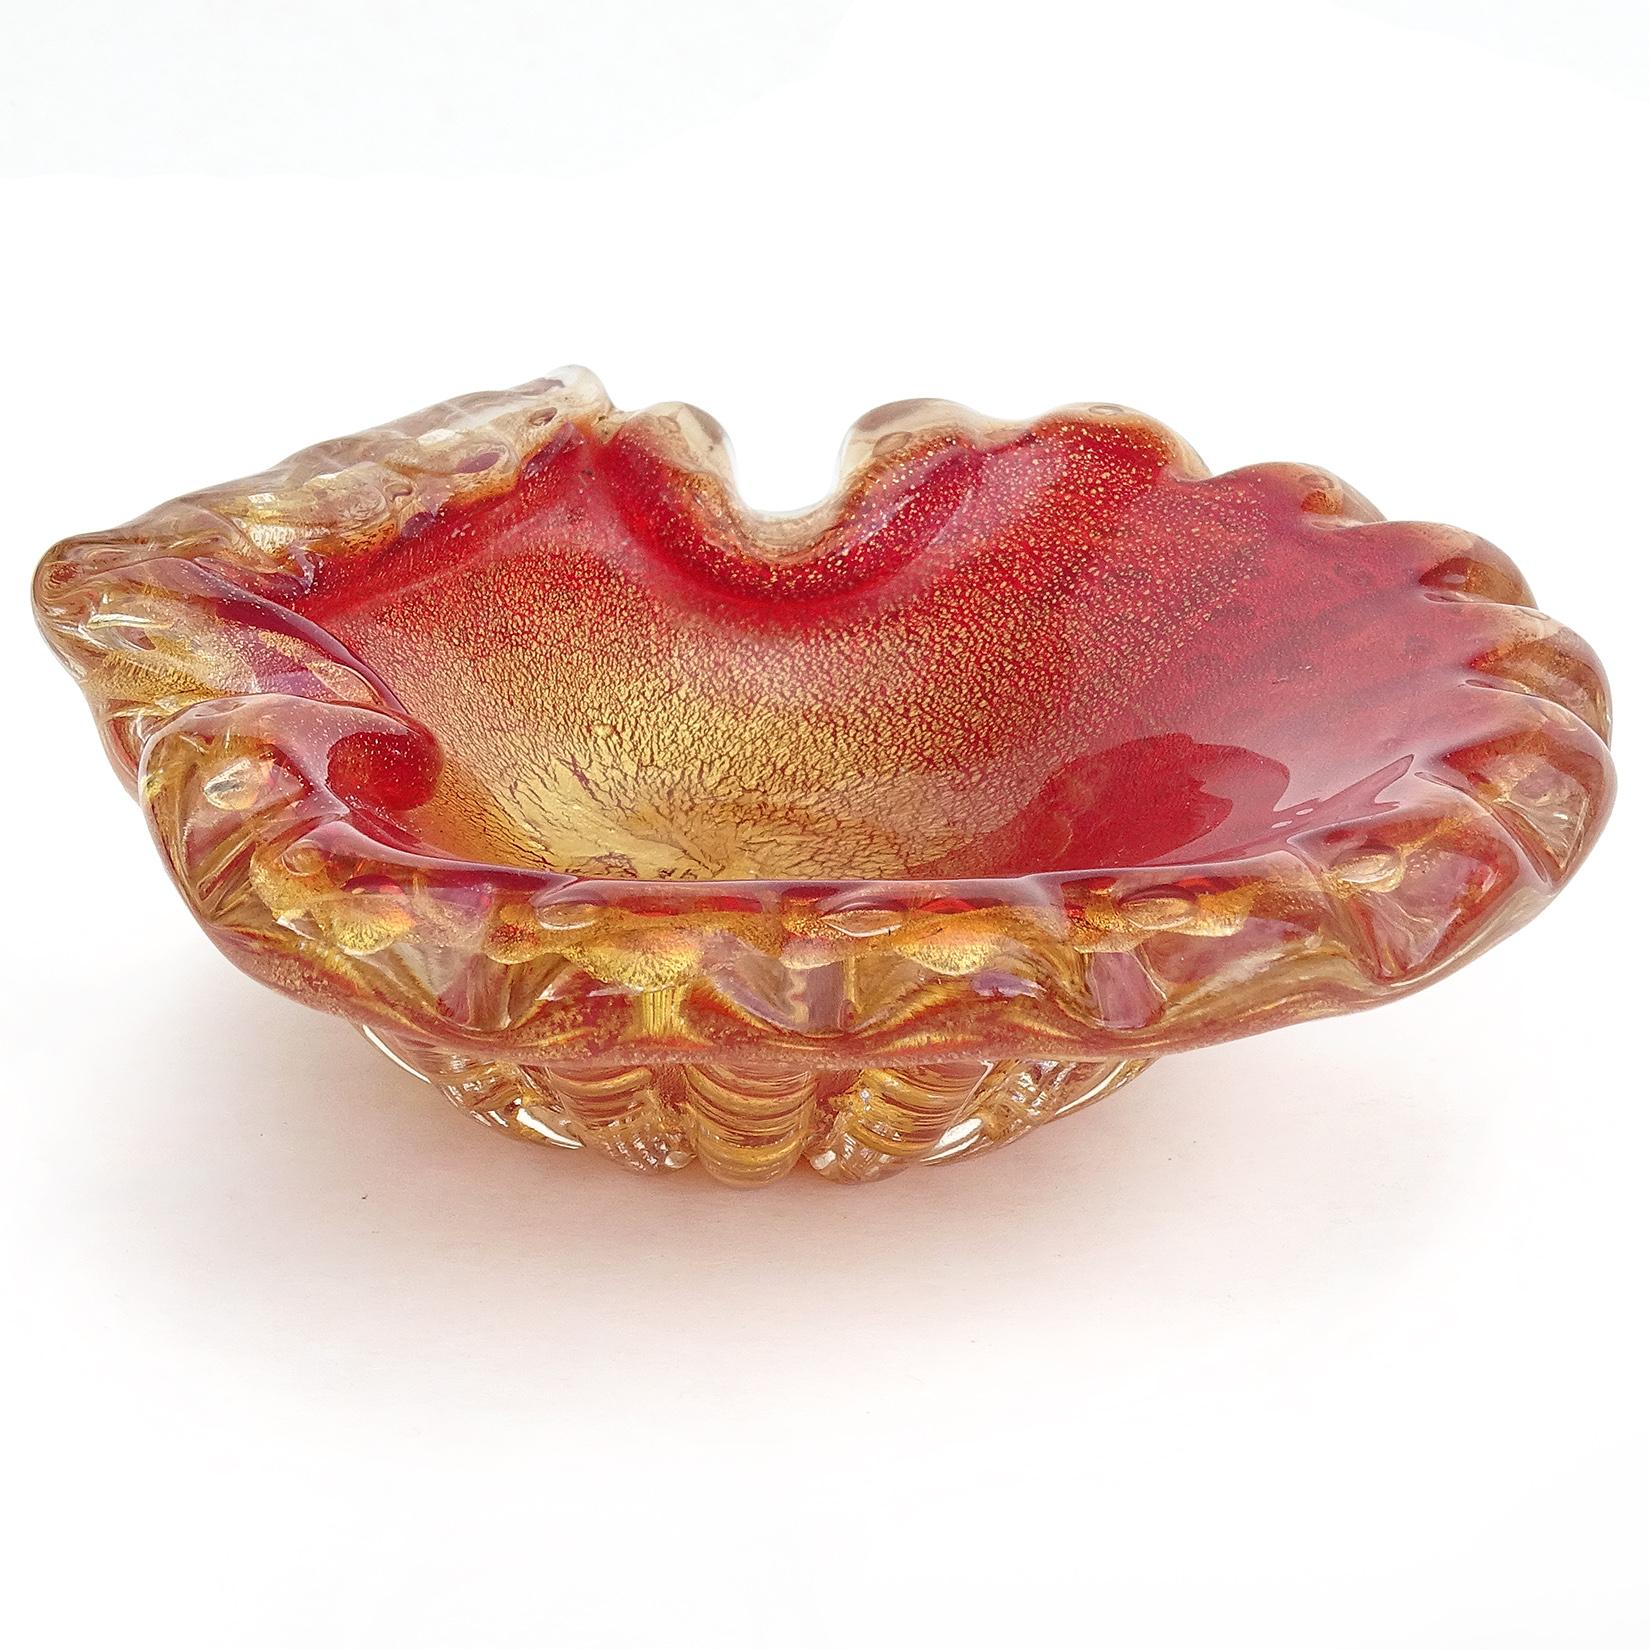 Beautiful vintage Murano hand blown red, controlled bubbles and gold flecks Italian art glass sculptural fan shape conch / seashell bowl. Documented to the Barovier e Toso company. The bowl has an early original Italian gallery label, which reads